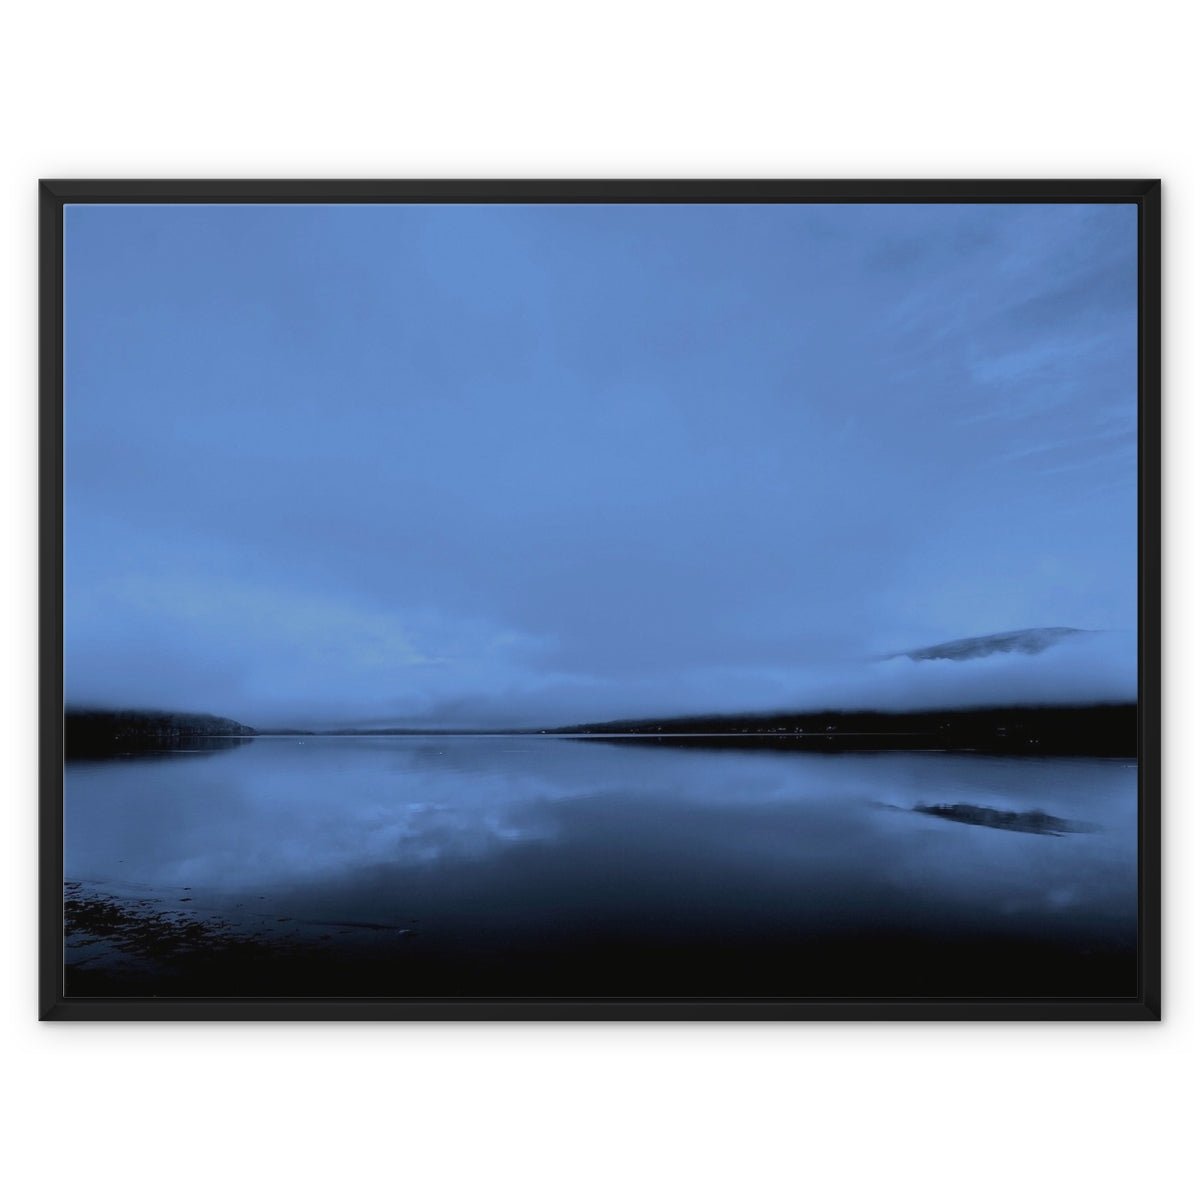 The Blue Hour Loch Fyne Painting | Framed Canvas From Scotland-Floating Framed Canvas Prints-Scottish Lochs & Mountains Art Gallery-32"x24"-Black Frame-Paintings, Prints, Homeware, Art Gifts From Scotland By Scottish Artist Kevin Hunter